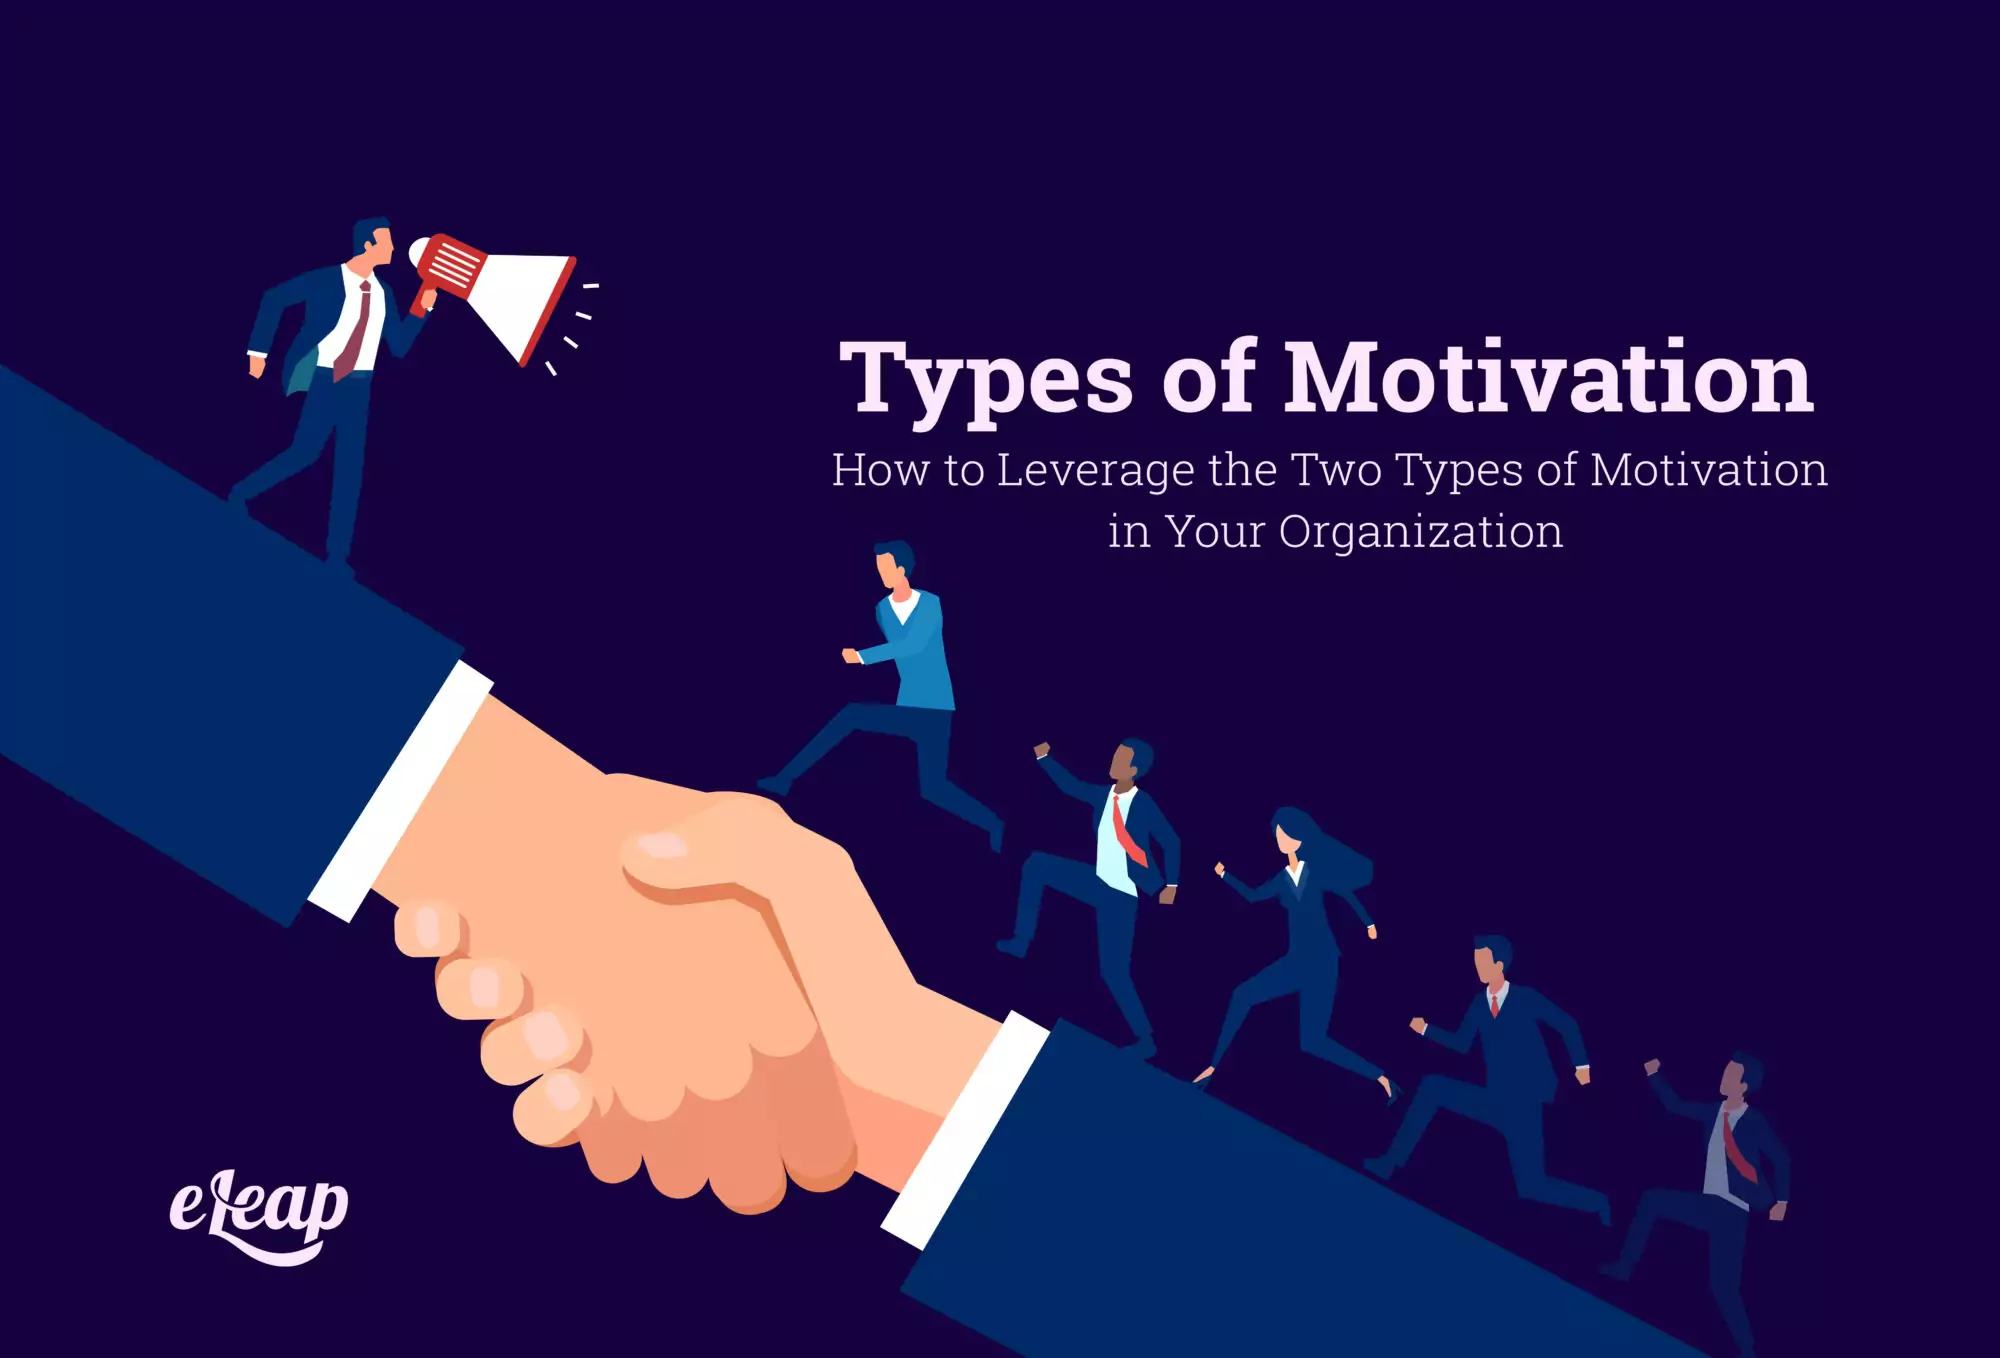 How to Leverage the Two Types of Motivation in Your Organization